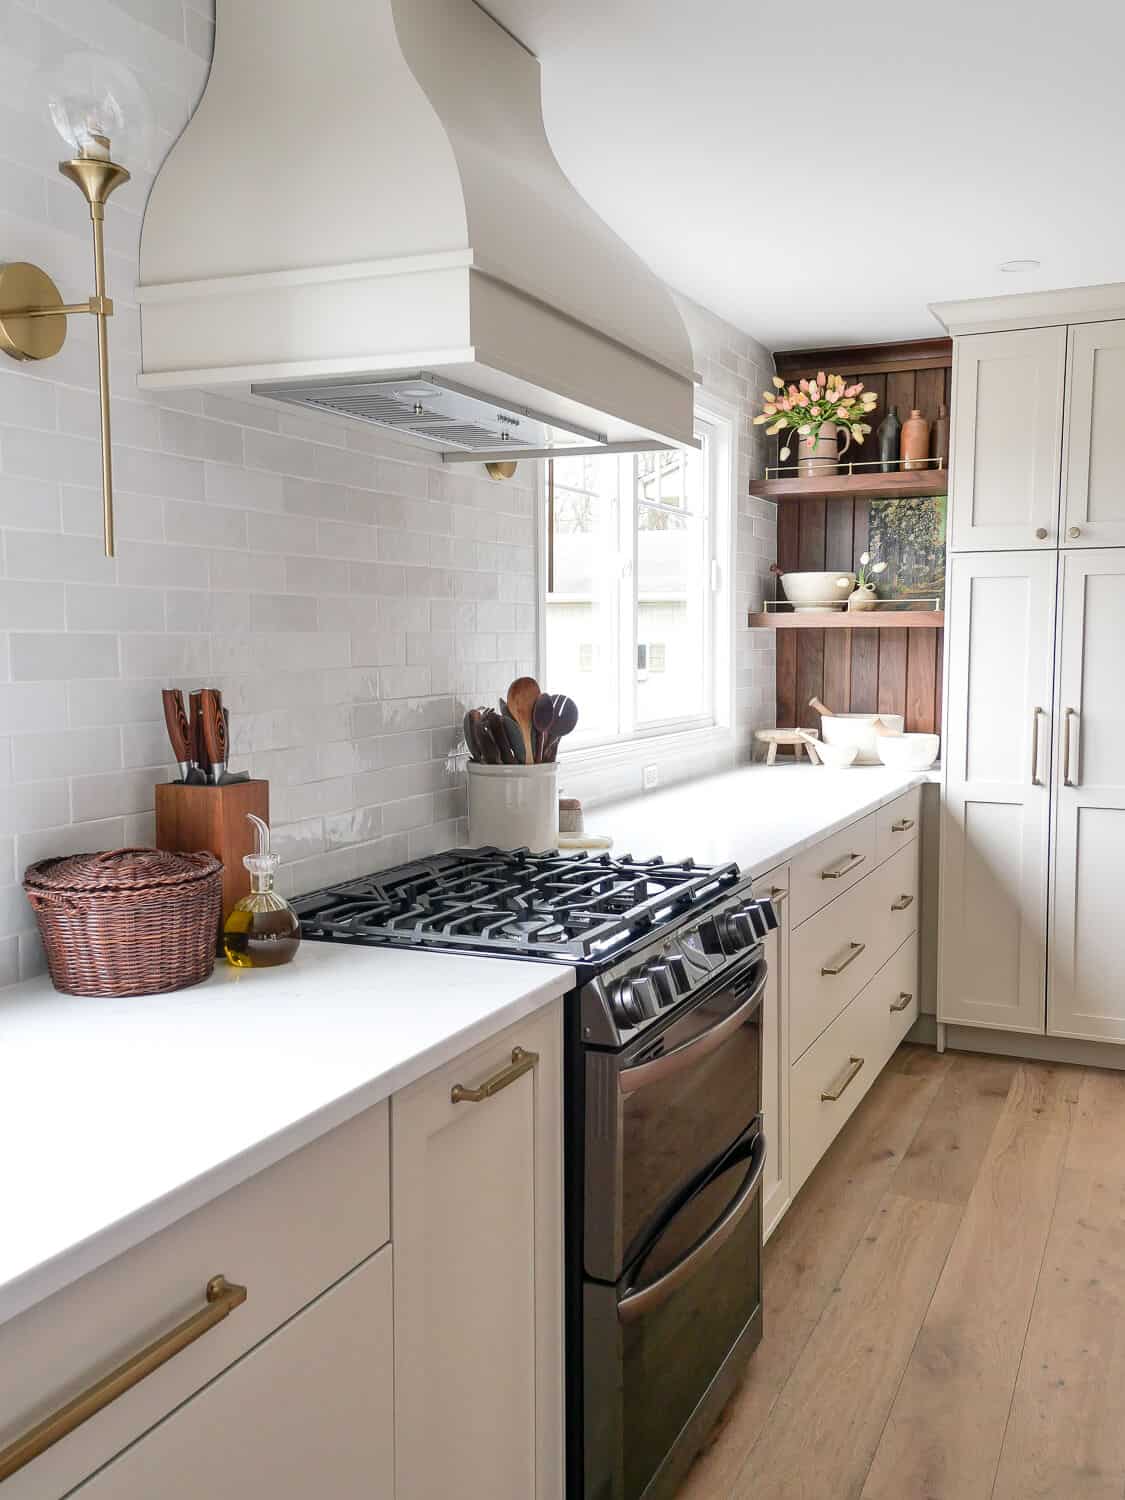 Inset Cabinets vs Overlay: The Unbiased Truth About Each Style